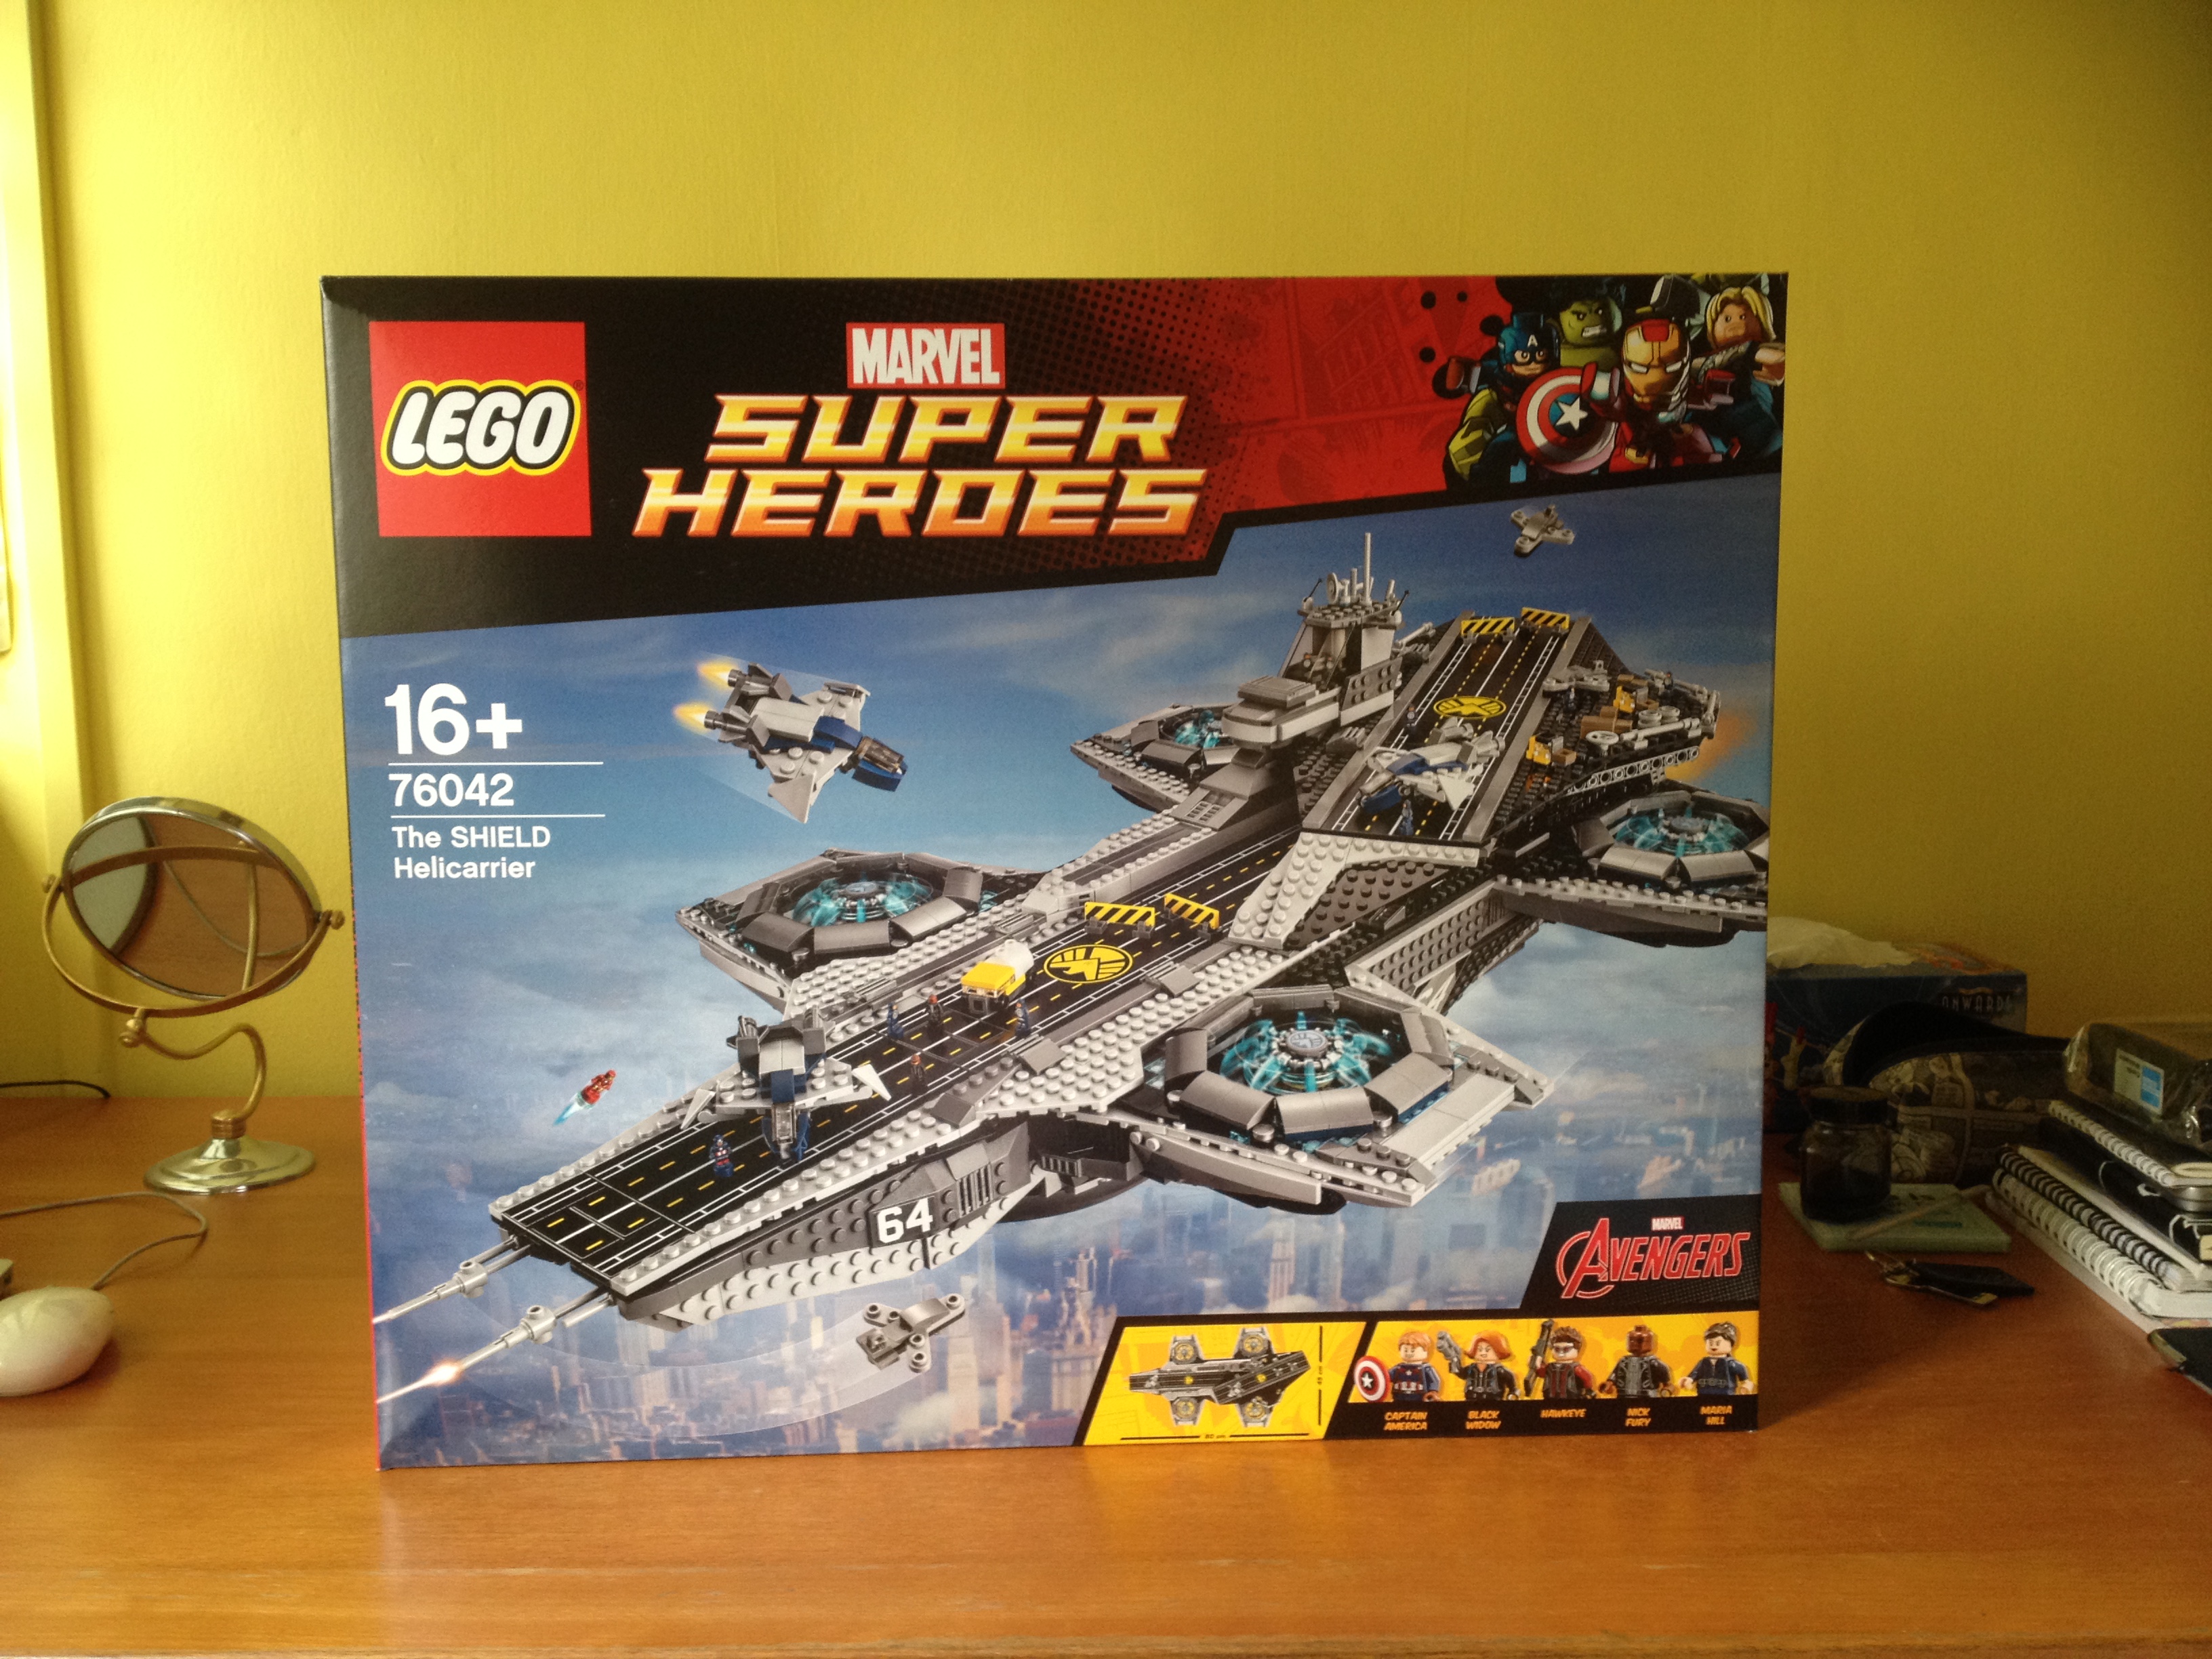 Lego SHIELD Helicarrier box set front